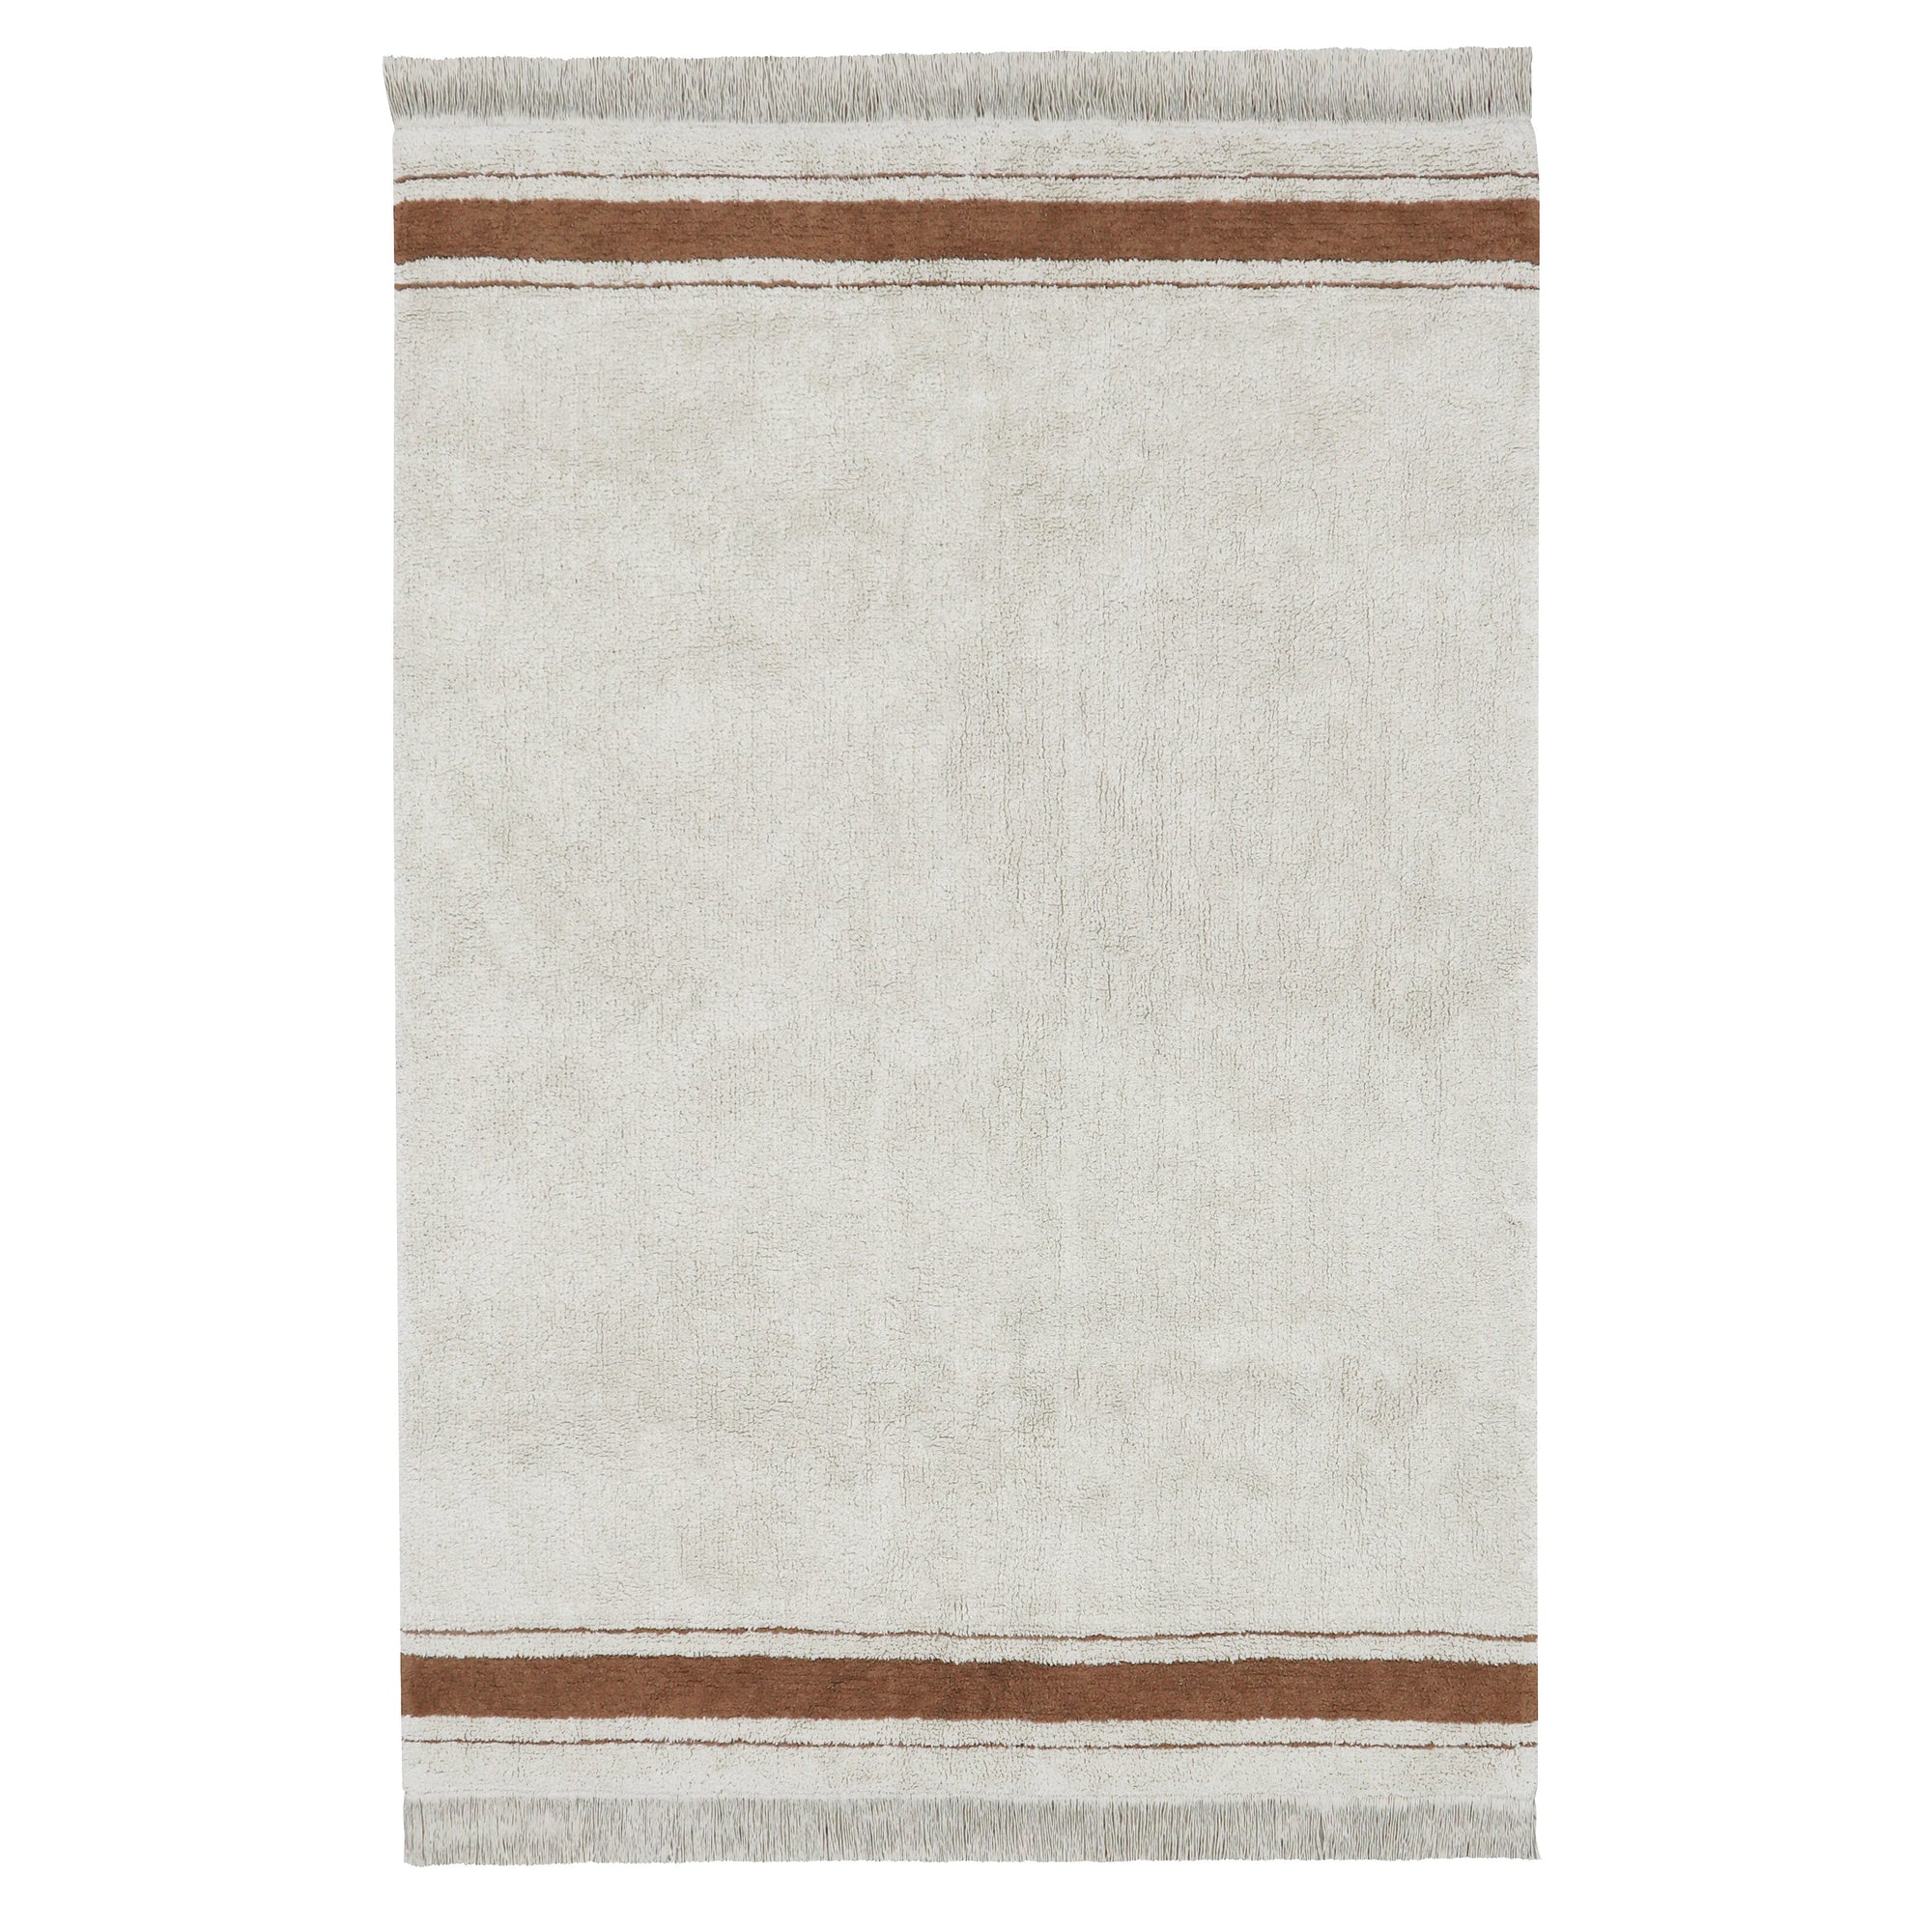 Lorena Canals Little Chefs Gastro Toffee Washable Rug